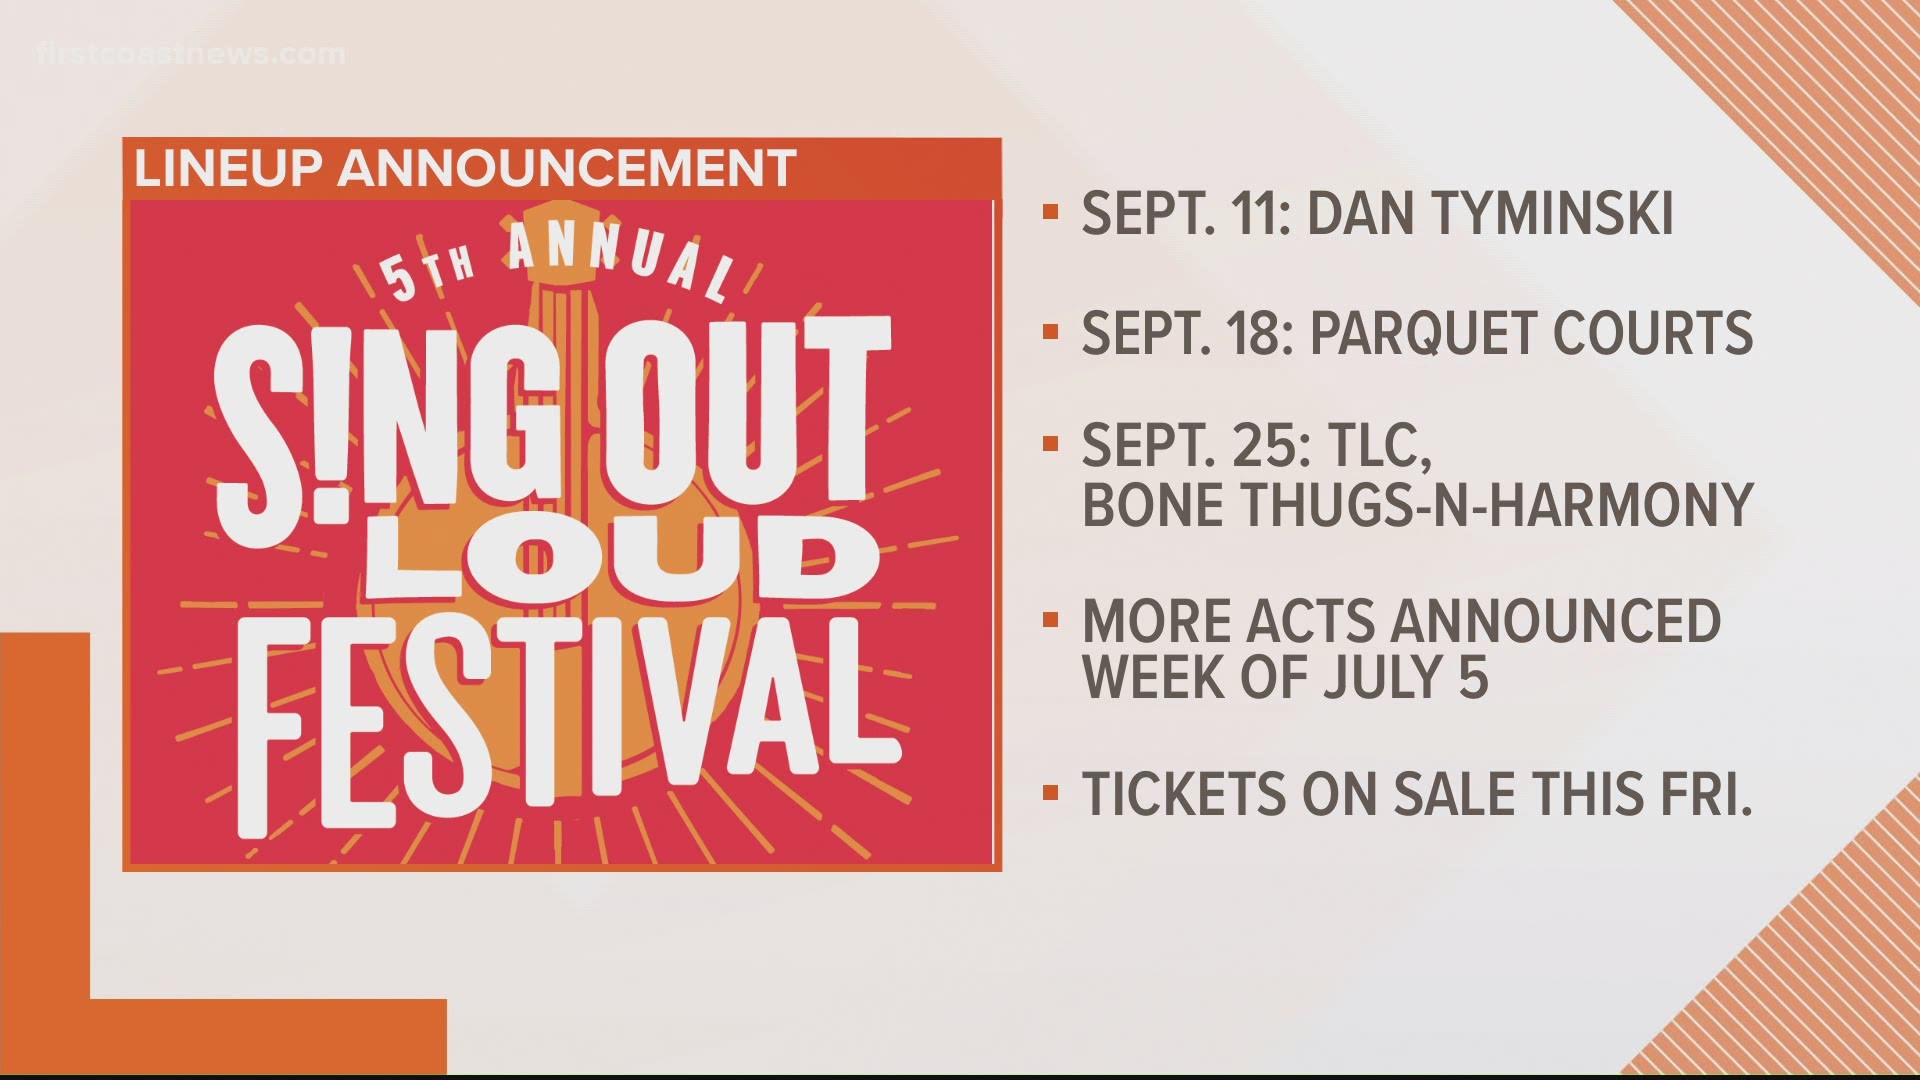 Headliners this year include TLC and Bone Thugs-N-Harmony, Mayday Parade, Yola, Parquet Courts, DEHD and Dan Tyminski.